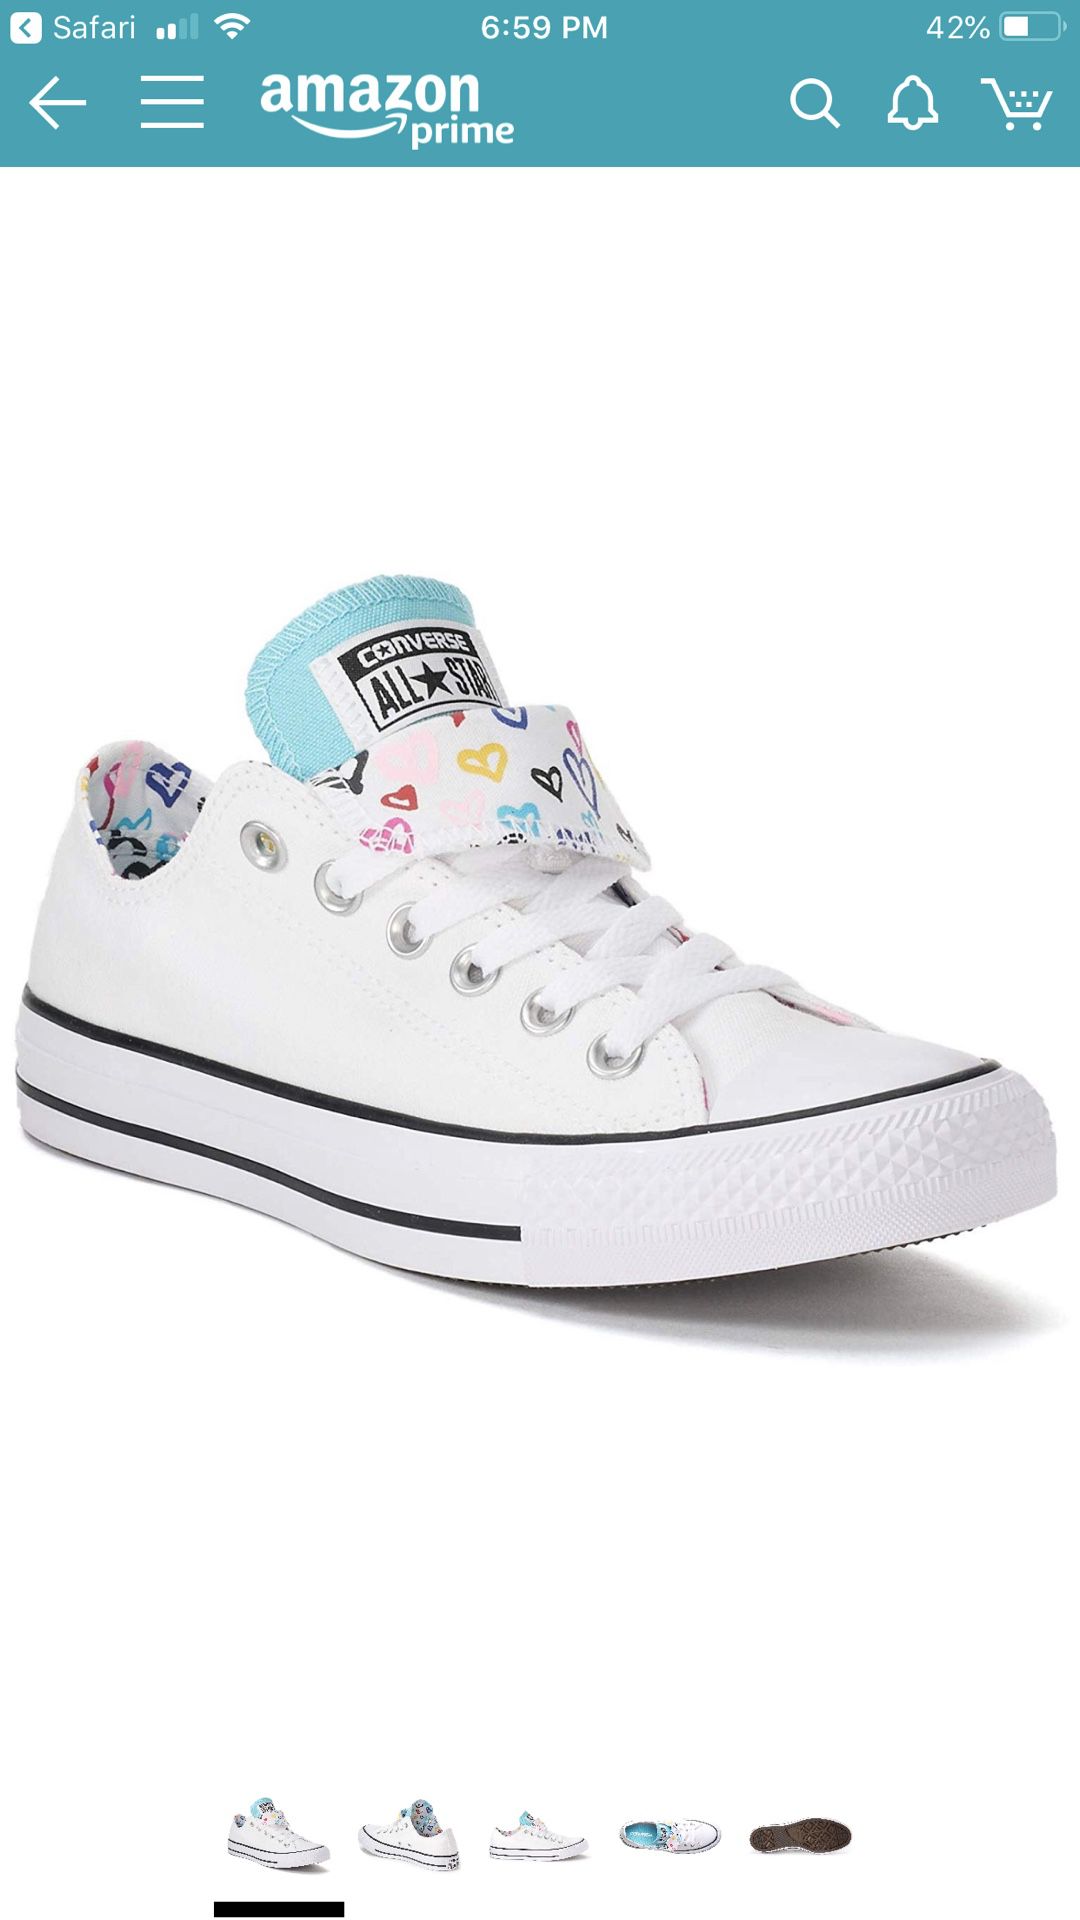 BRAND NEW- women’s double tongued Converse Sz 8